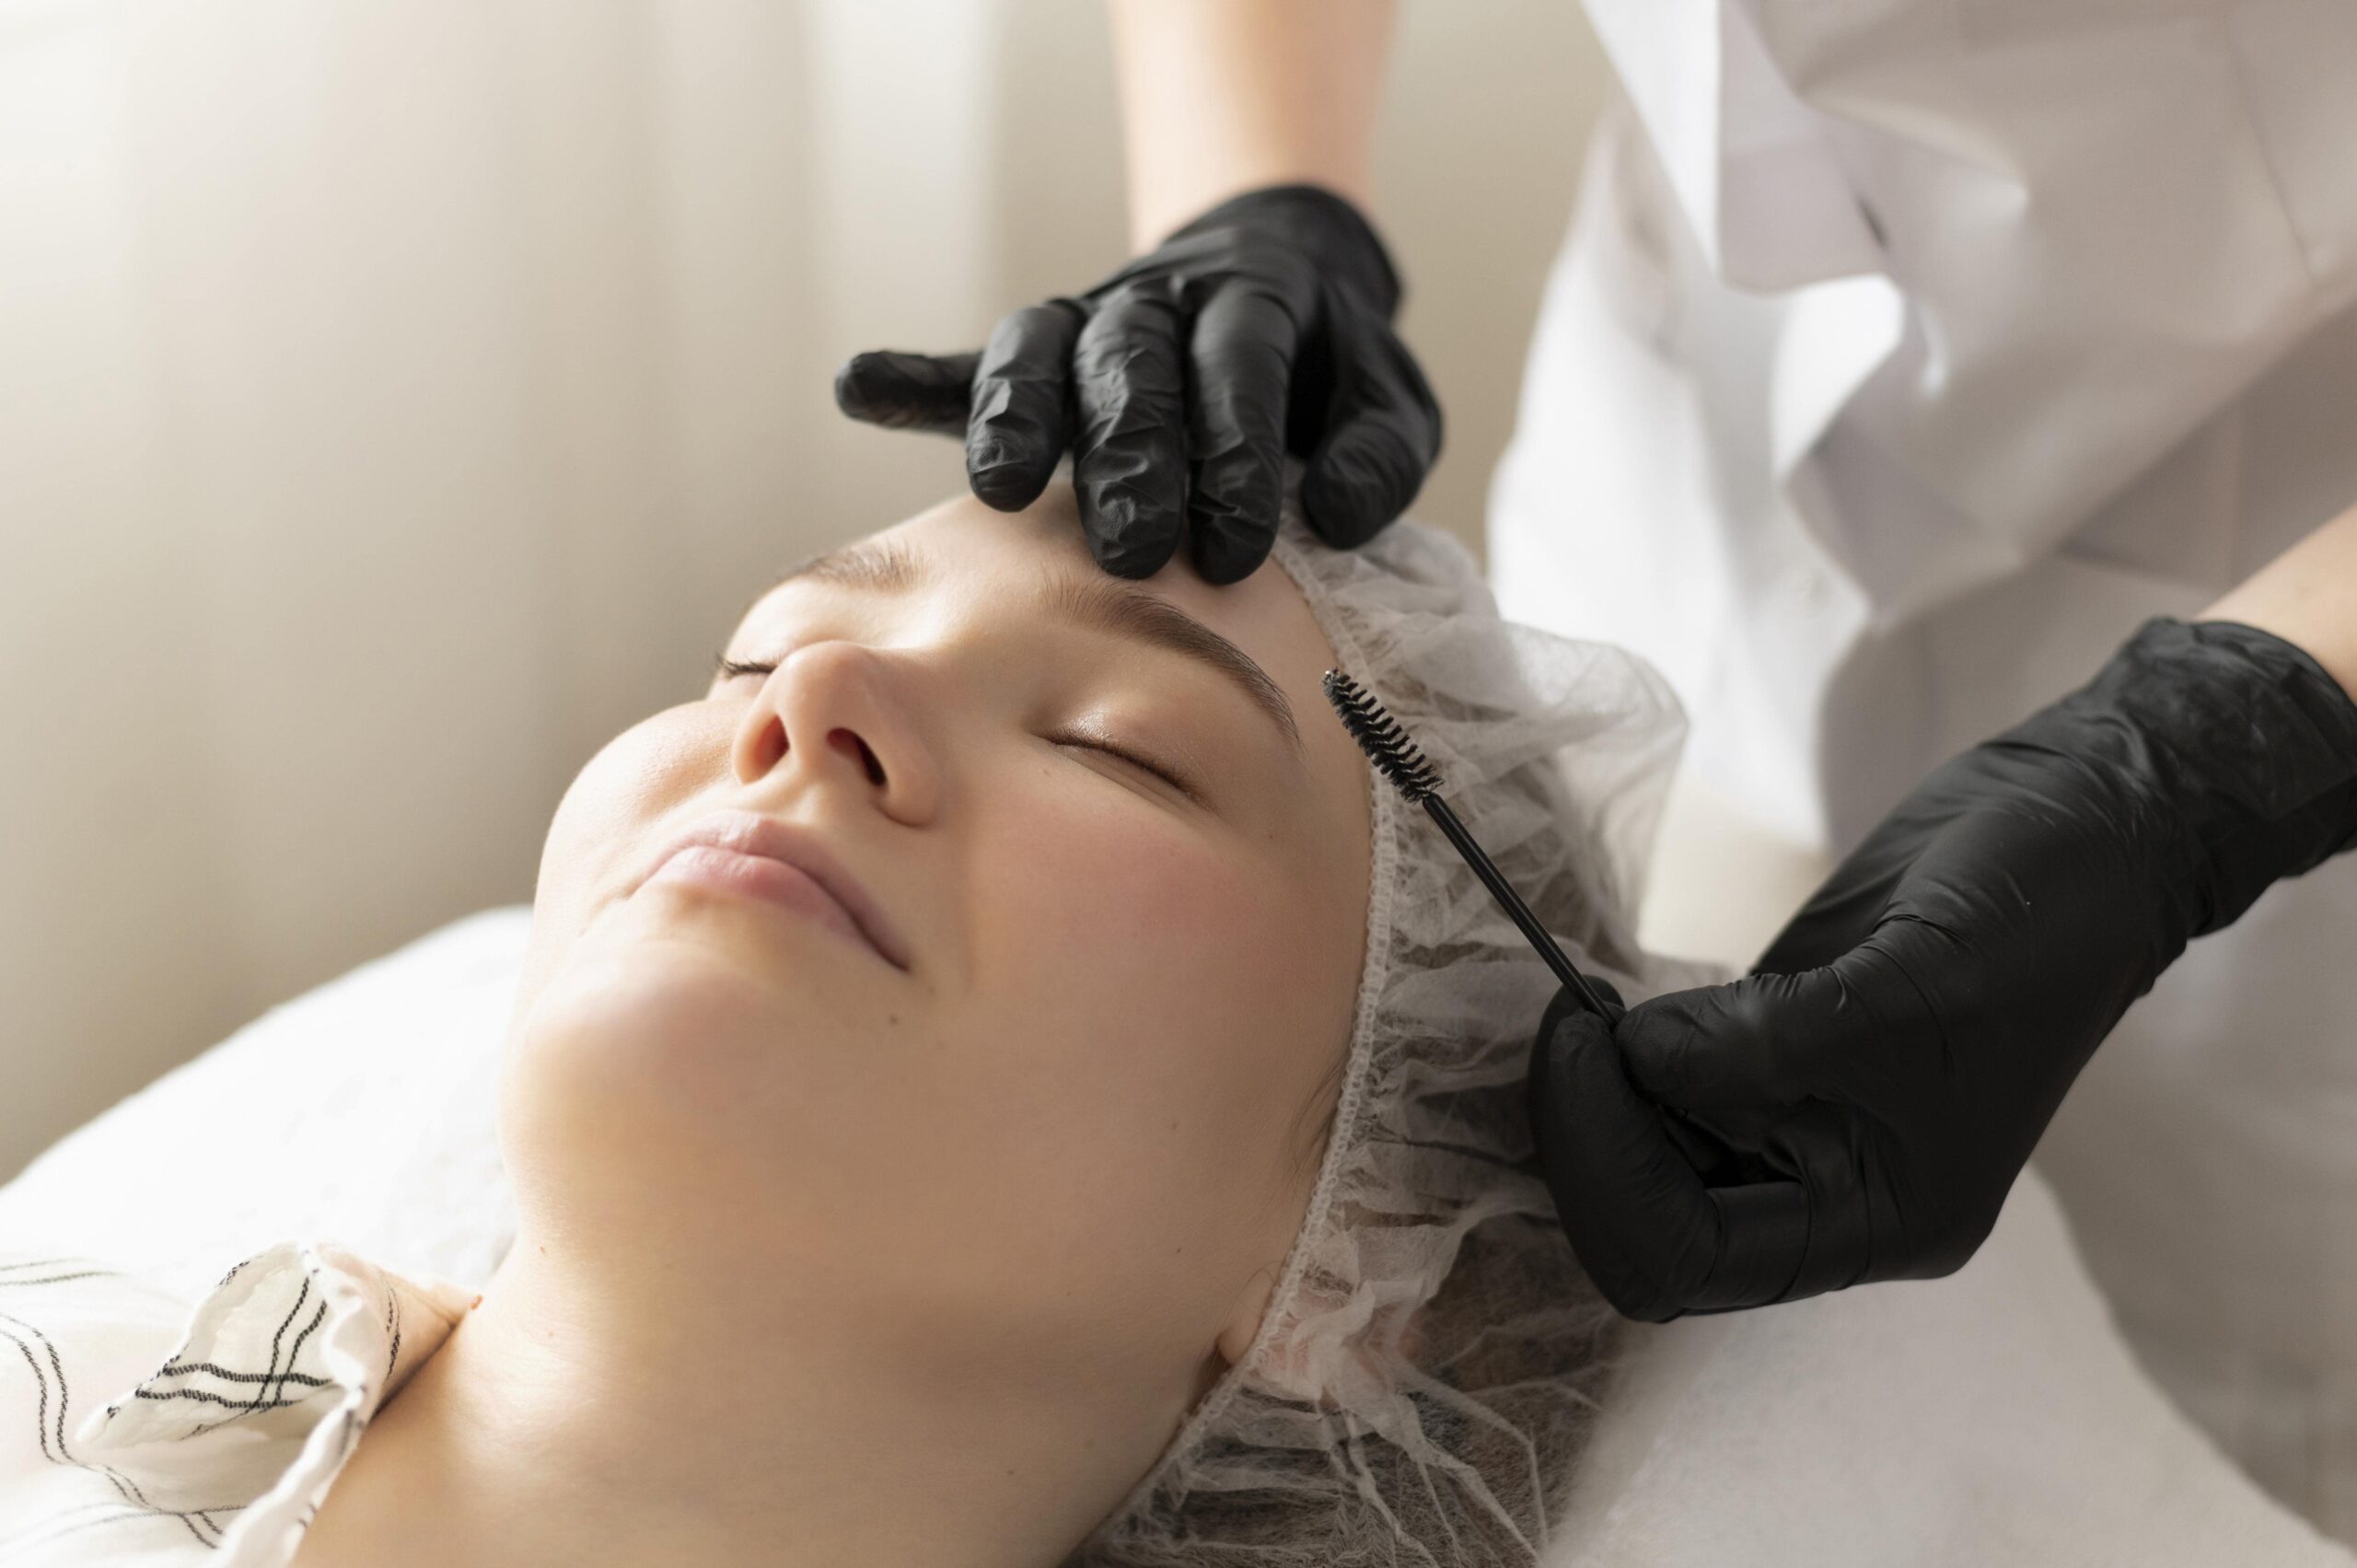 eyebrow threading services scaled